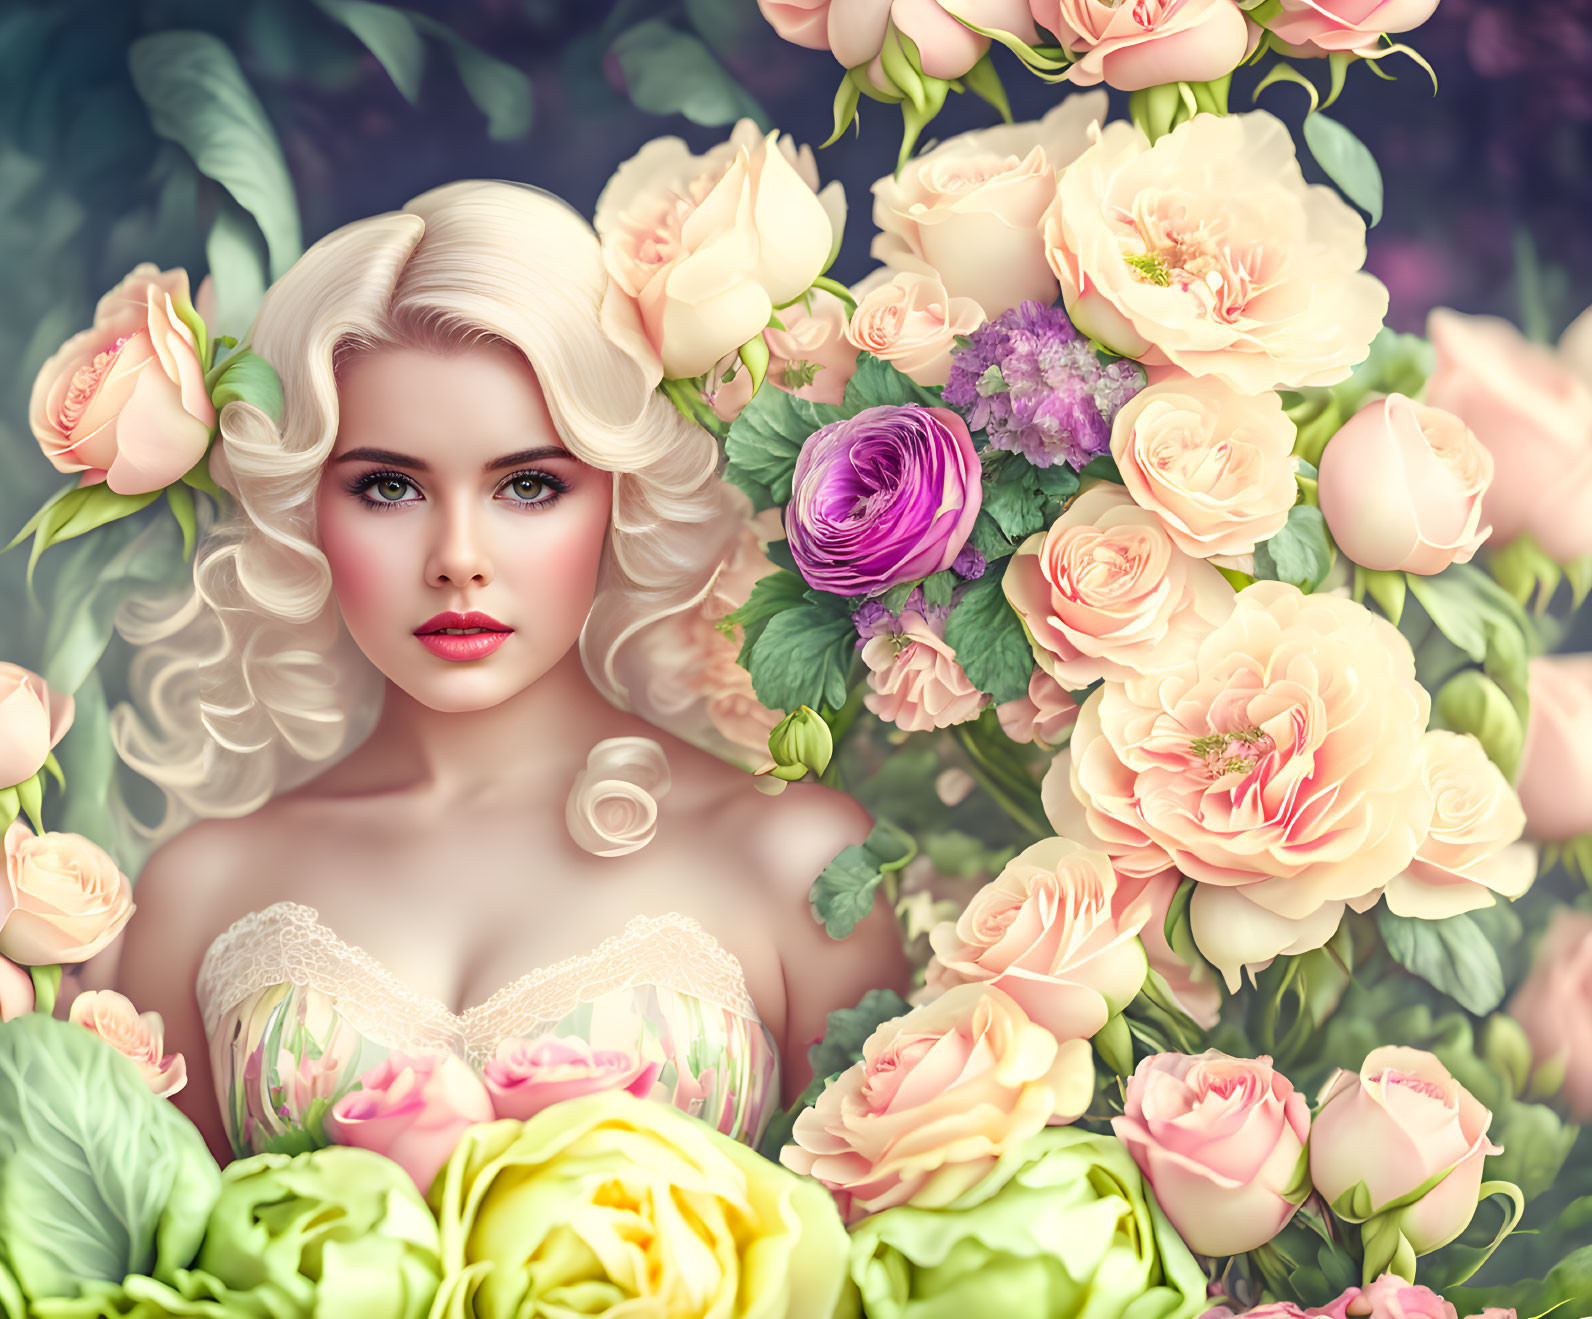 Blonde Woman with Red Lipstick Among Pastel Roses